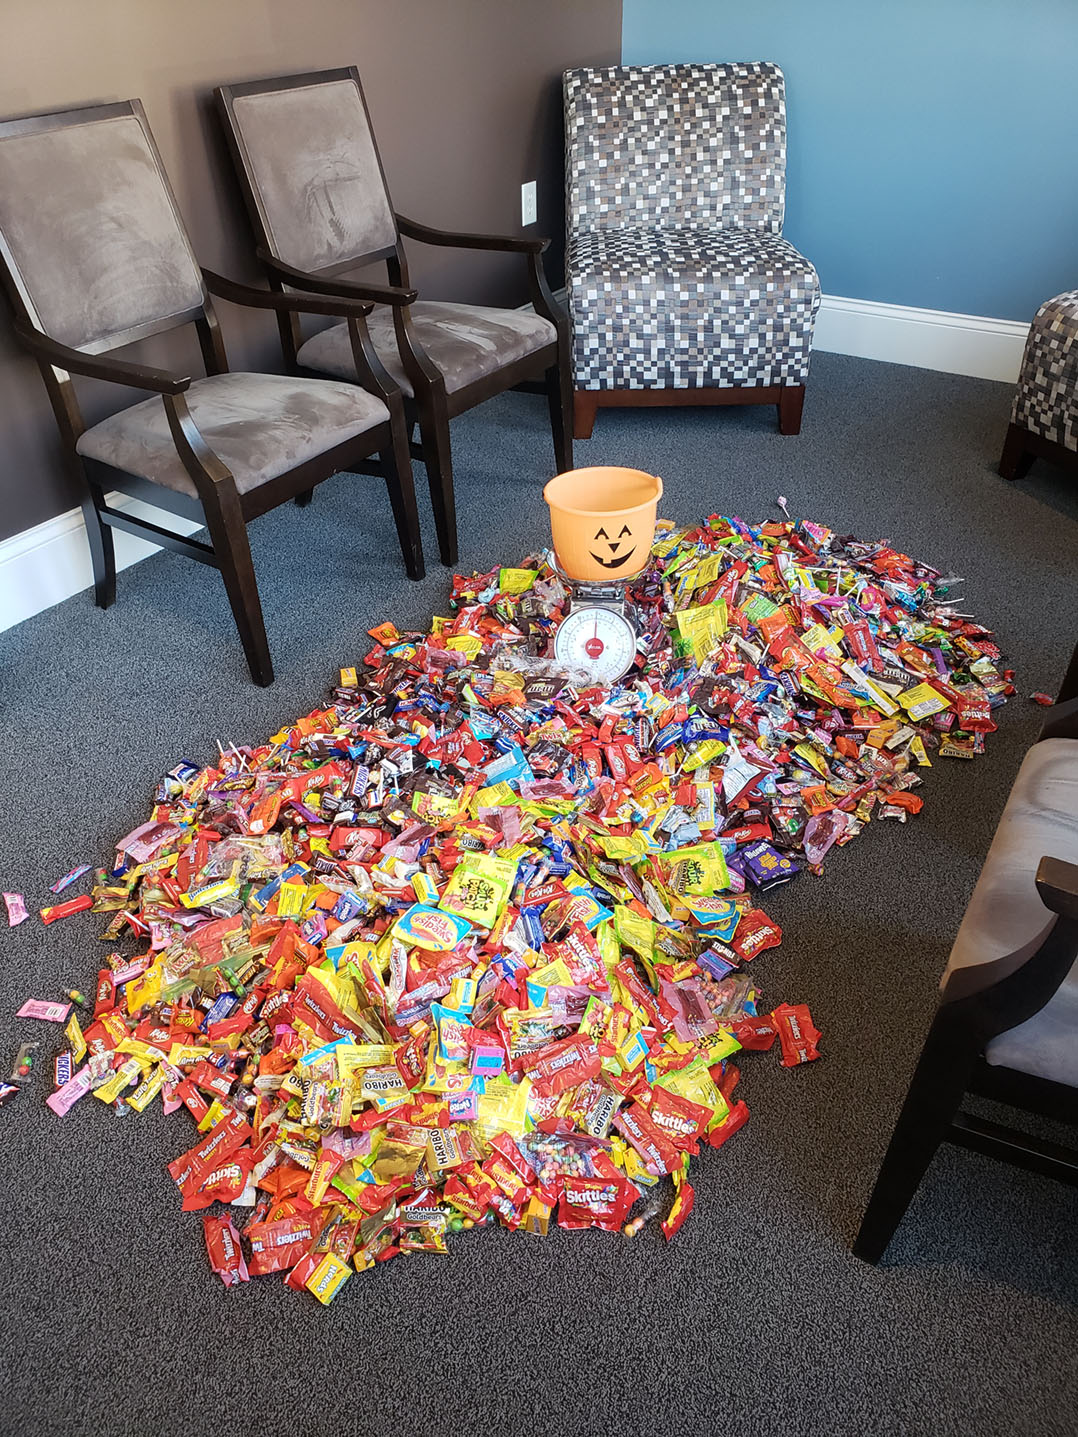 Martine Dentistry holds 12th annual candy buyback